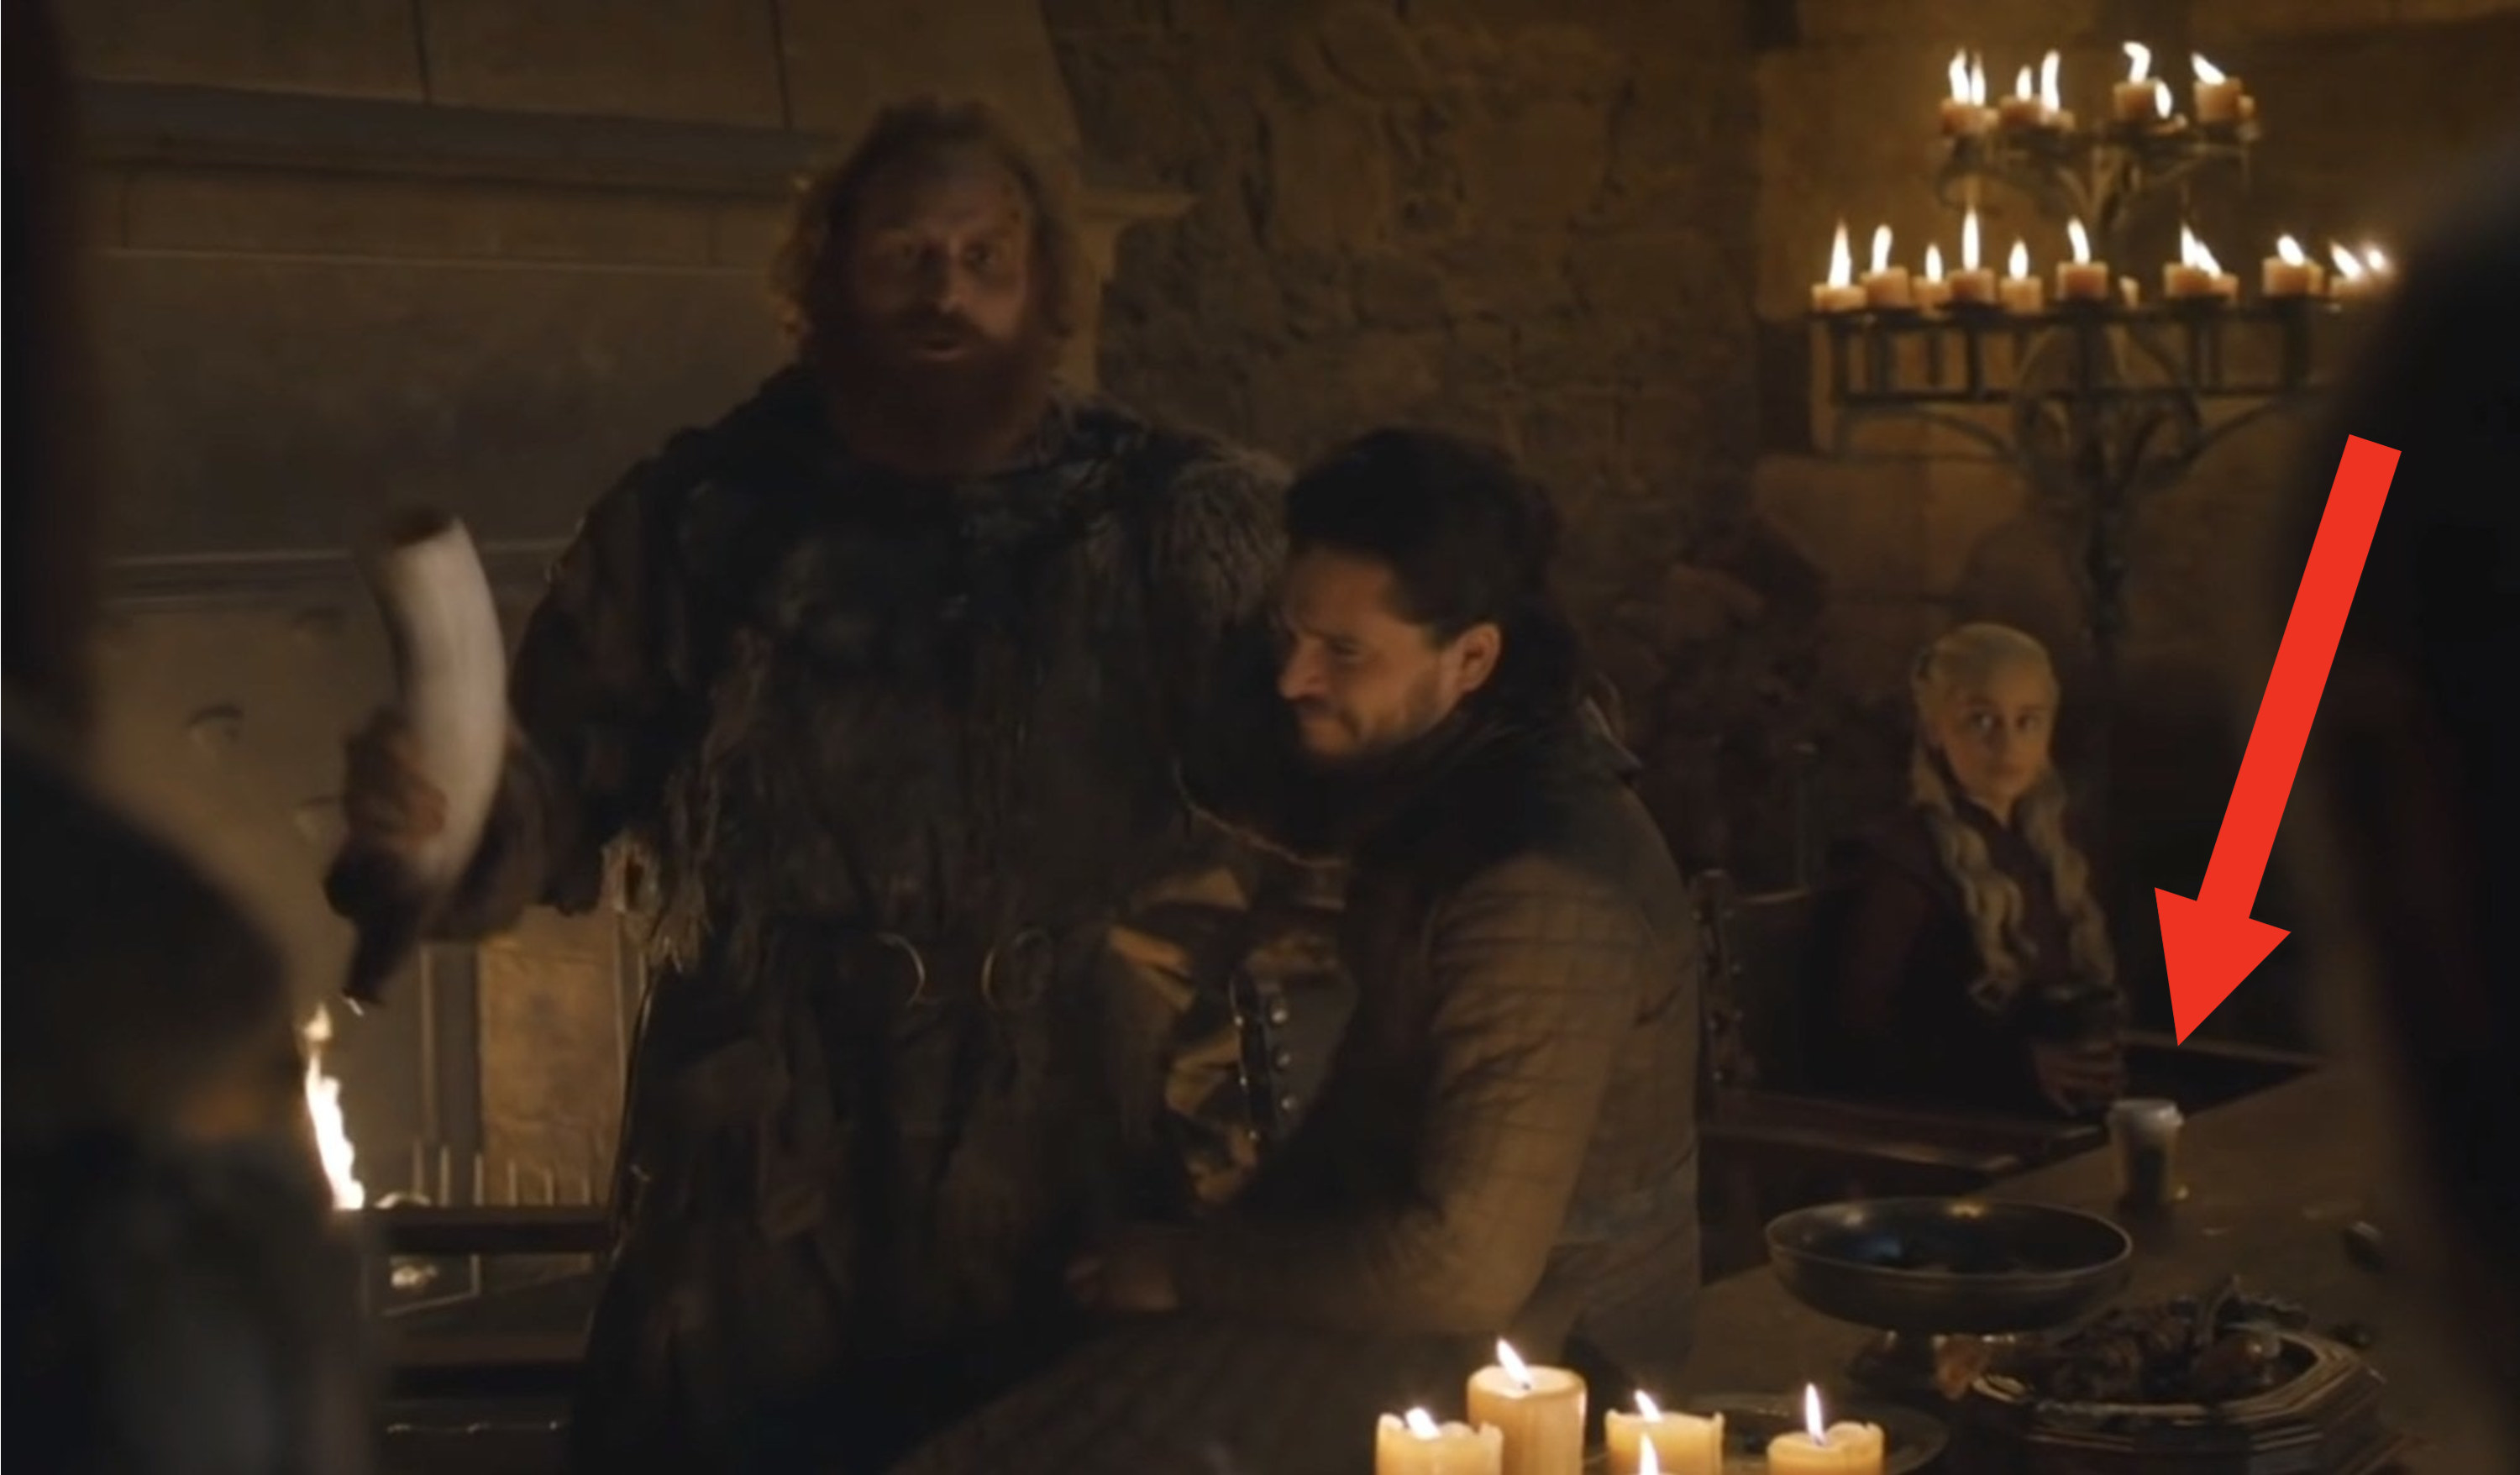 A Starbucks cup on the table in a scene in Game of Thrones